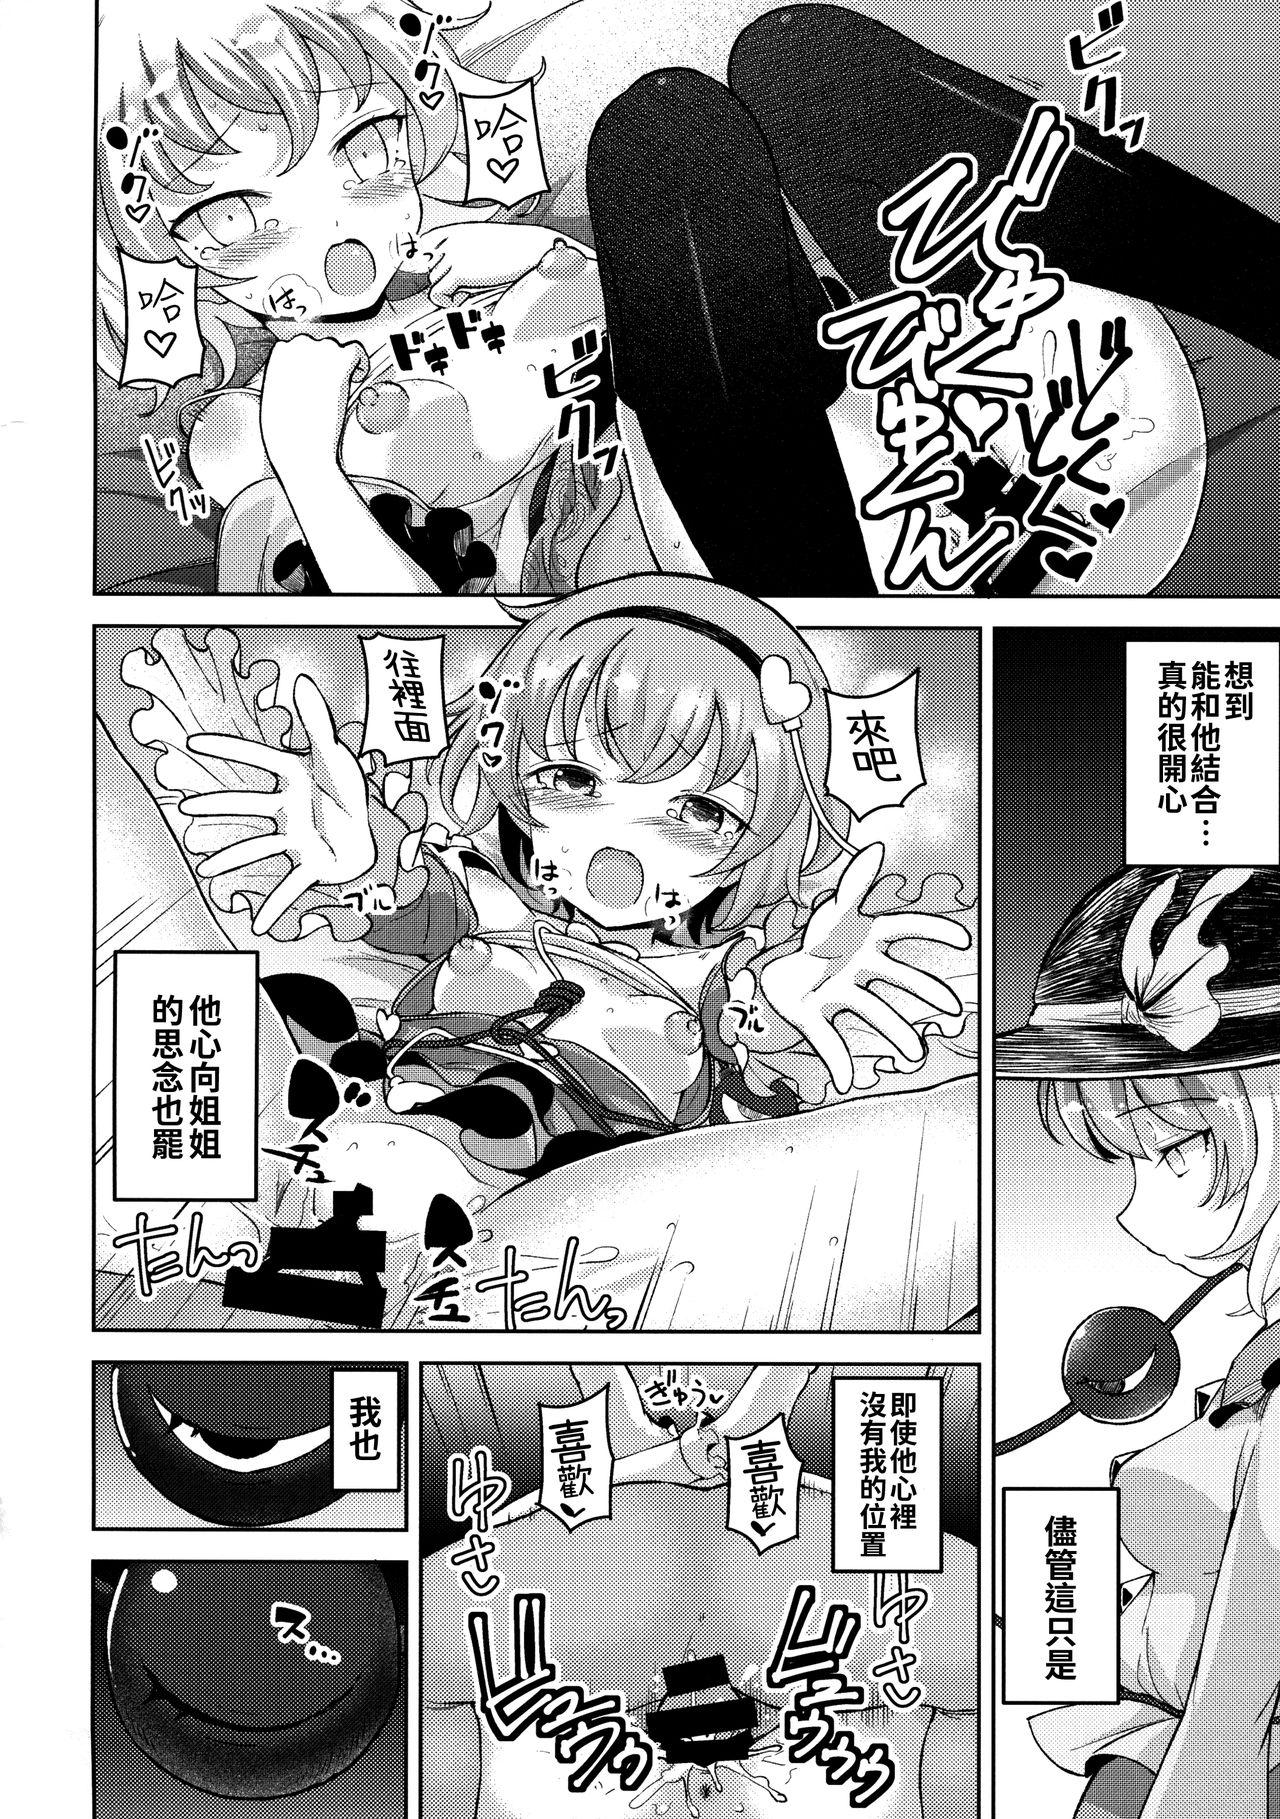 Roundass Aisare Chireiden - Touhou project Home - Page 6